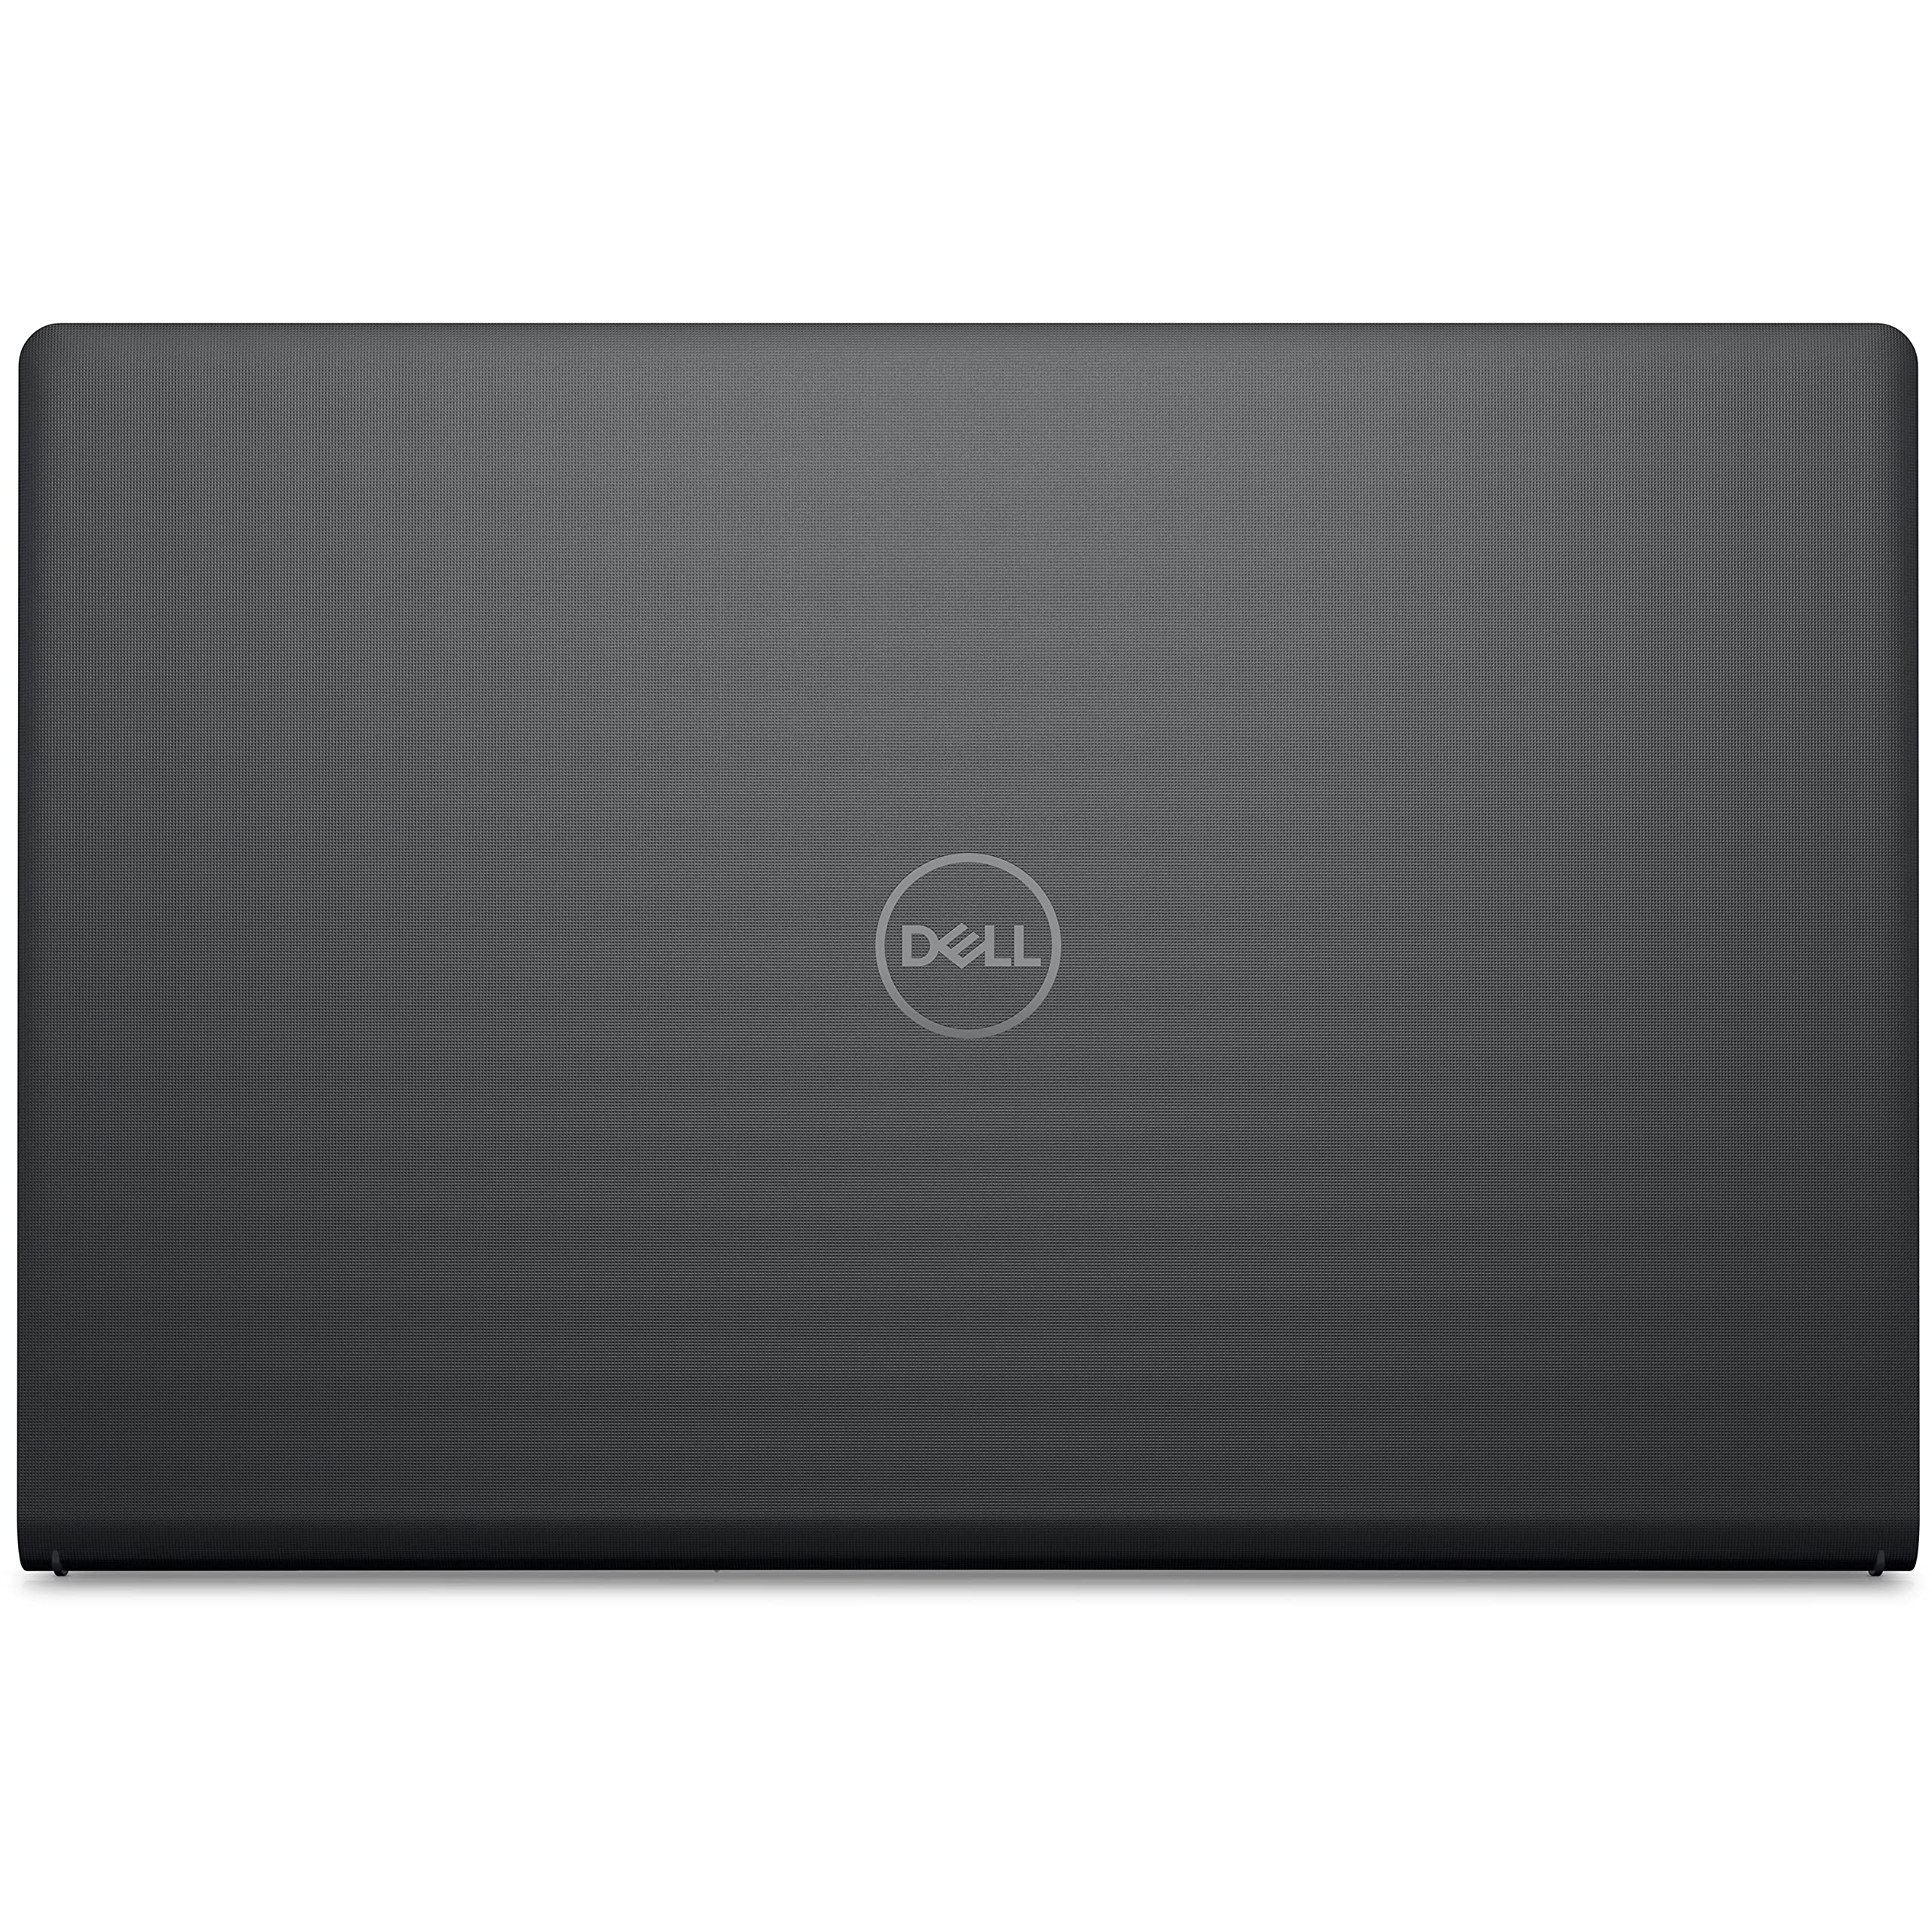 Dell Vostro 3510 15.6" FHD Business Laptop Computer, Intel Quad-Core i7-1165G7 up to 4.7GHz, 16GB DDR4 RAM, 512GB PCIe SSD, 802.11AC WiFi, Bluetooth, Carbon Black, Windows 11 Professional